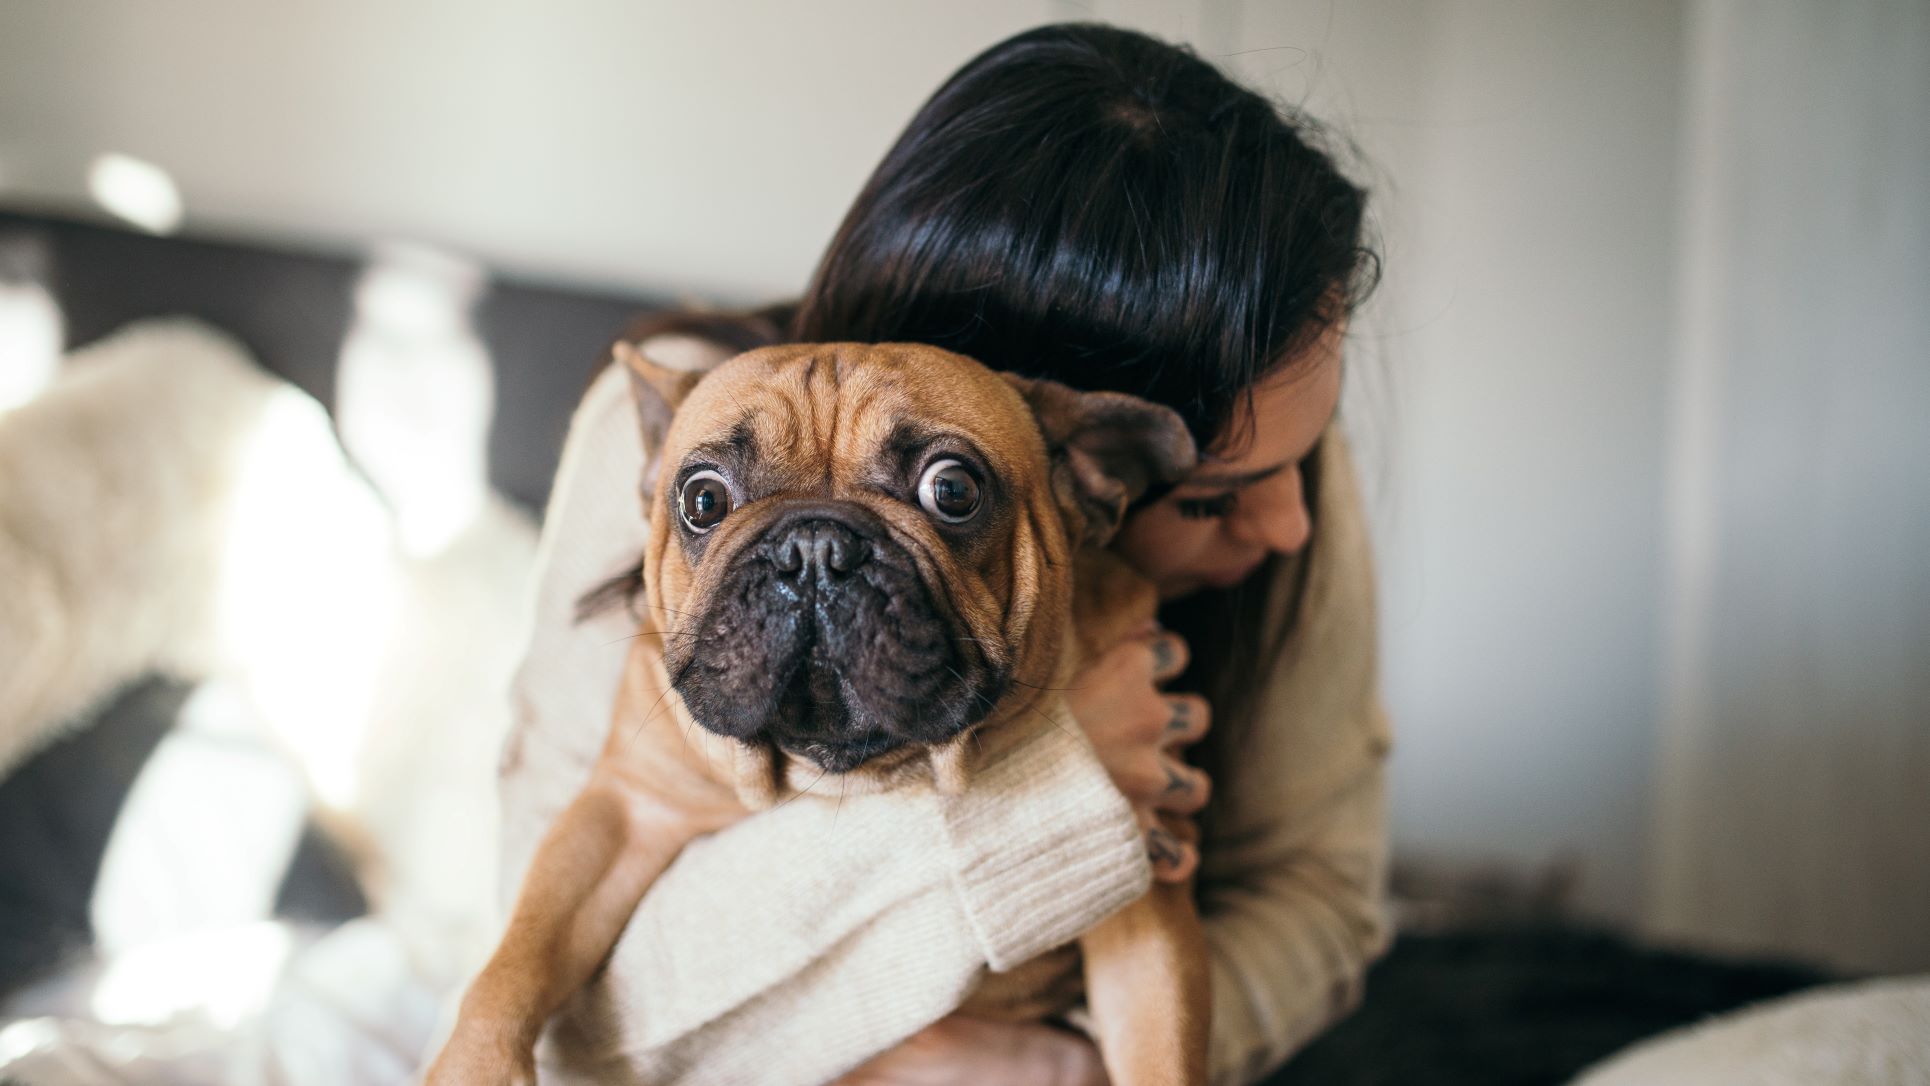 I learned these five dog body language cues and they changed my relationship with my dog